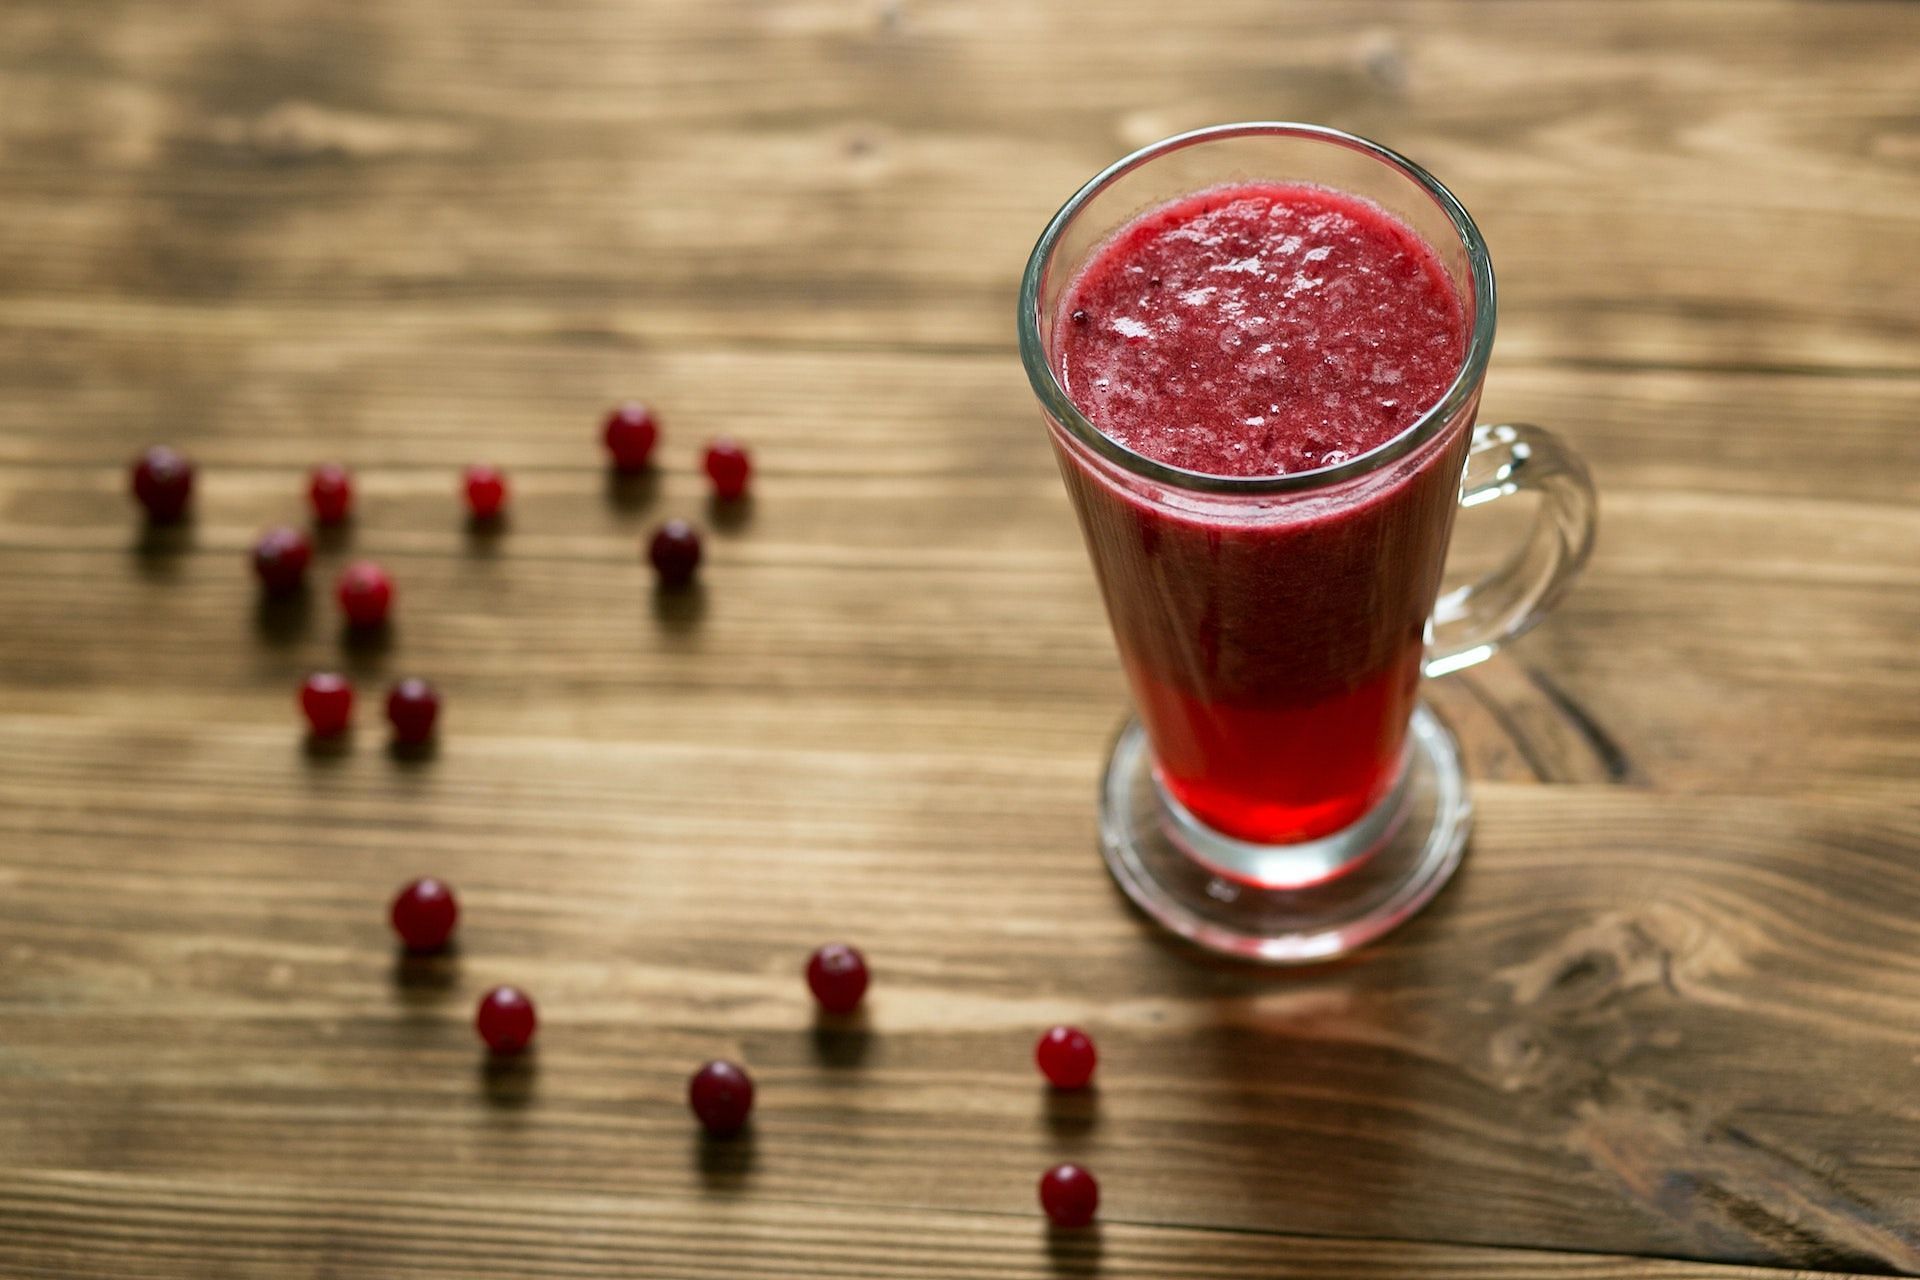 Drinking cranberry juice is one of the best home remedies for bladder infection. (Photo via Pexels/Daria Andrievskaya)